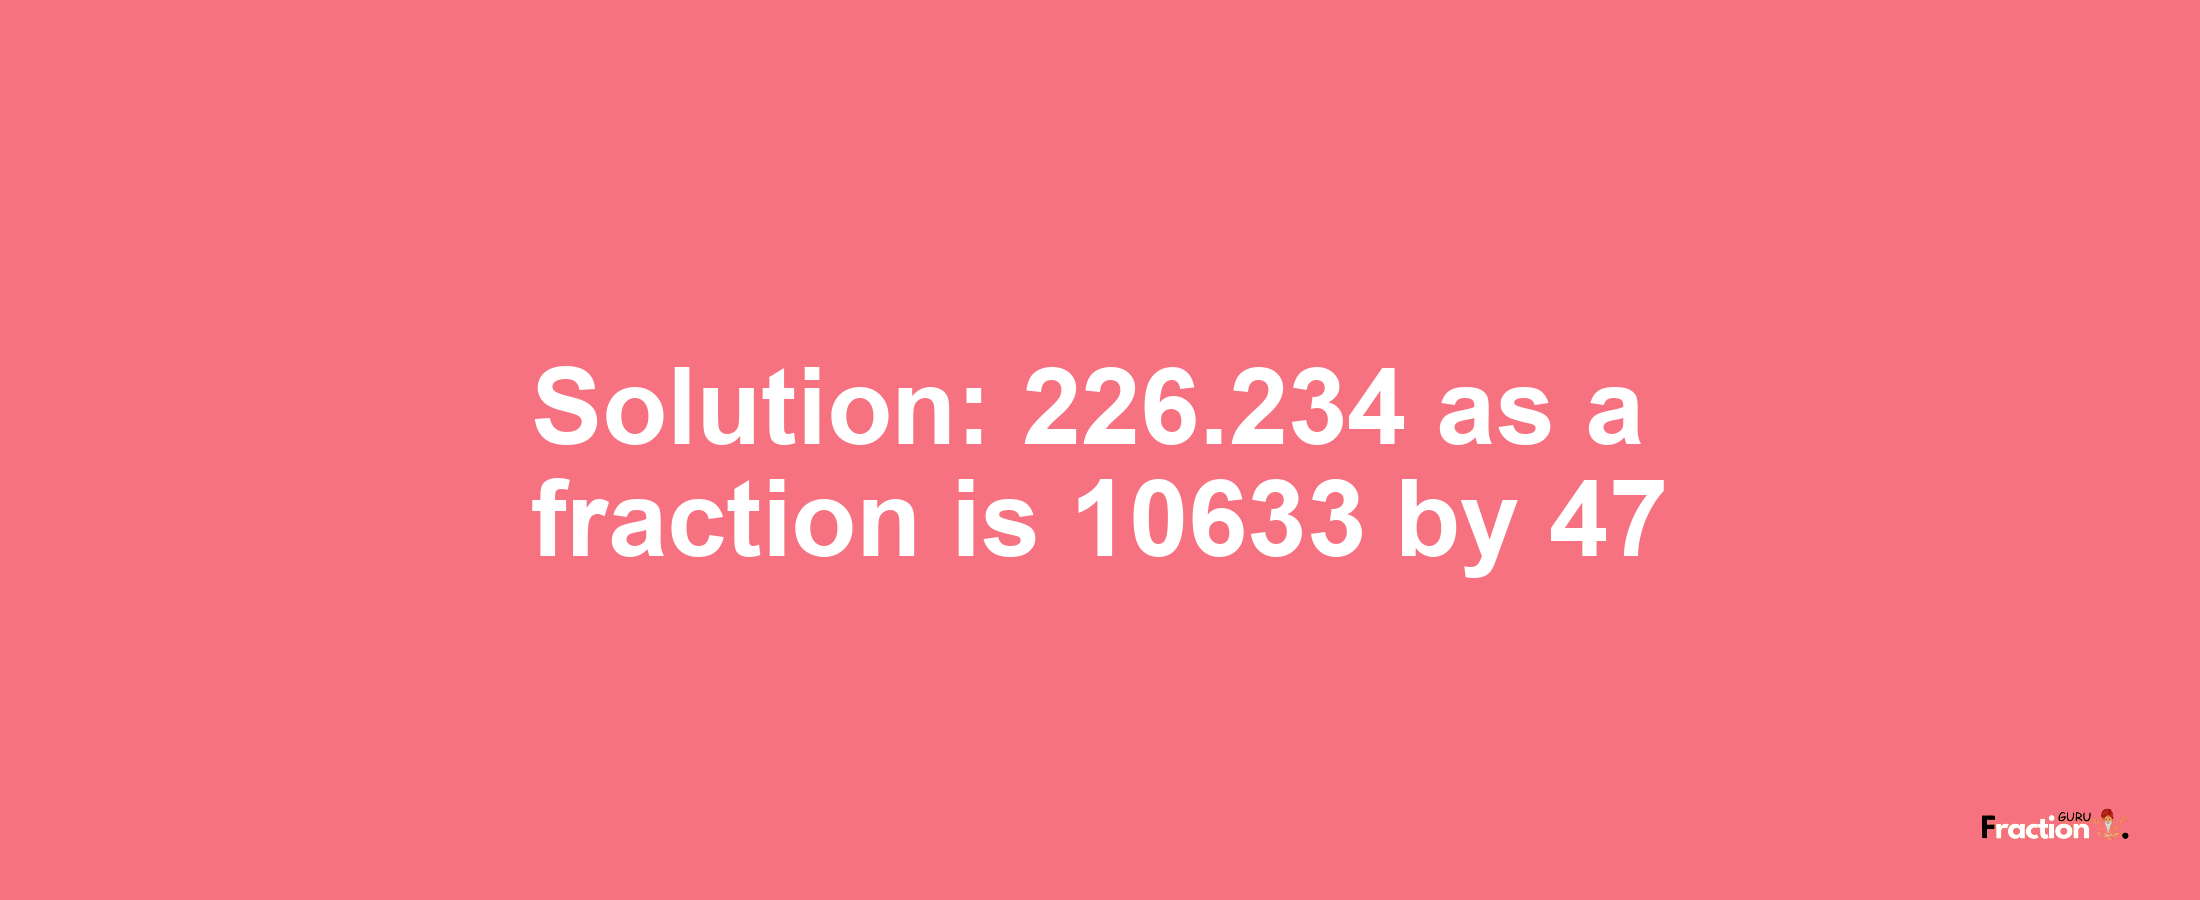 Solution:226.234 as a fraction is 10633/47